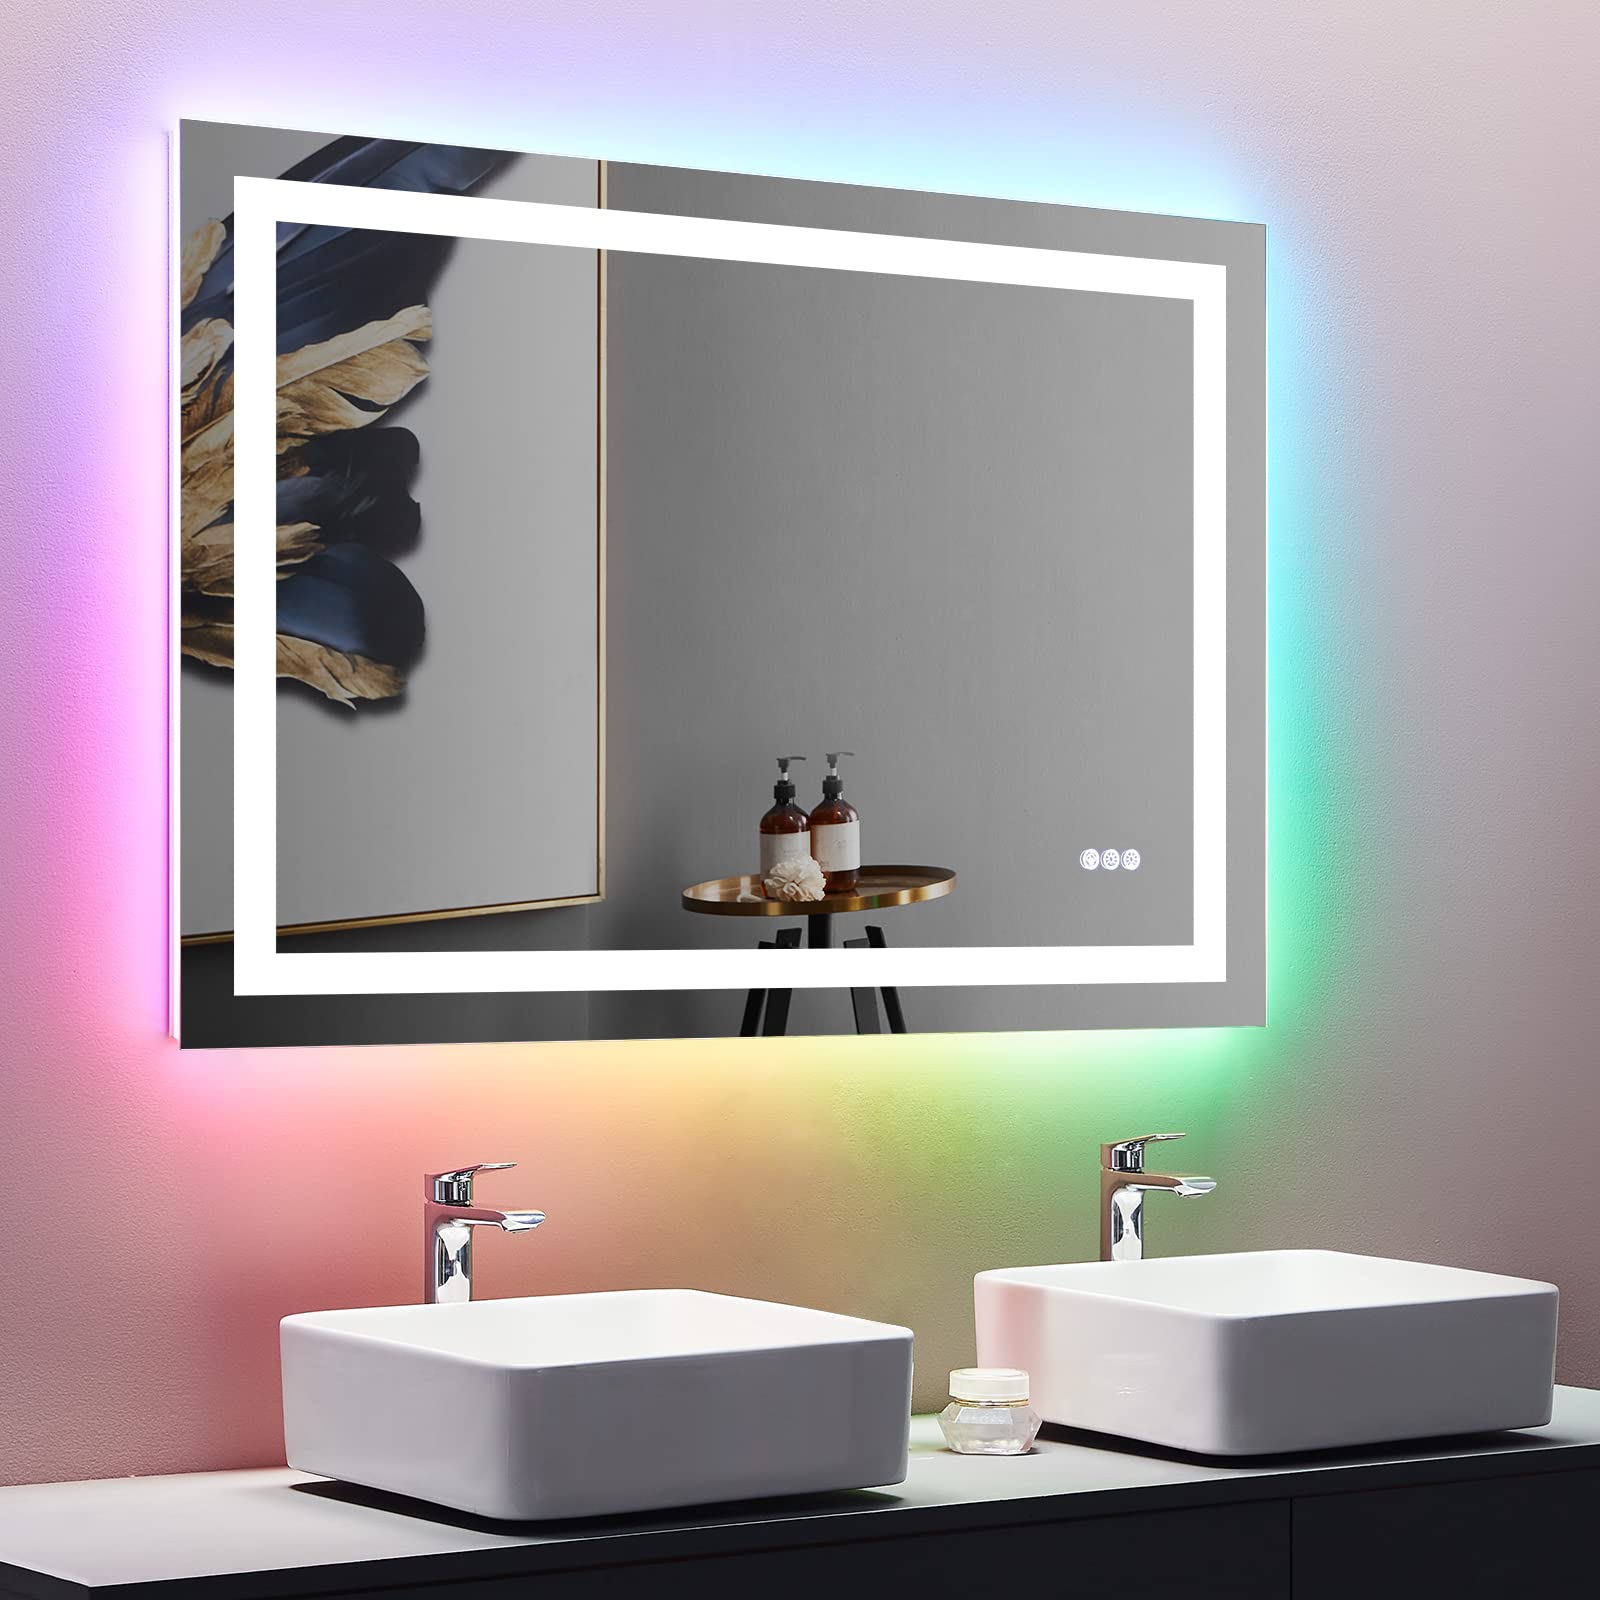 Bathroom Mirrors With LED Light Colorful Wall Vanity Cosmetic Mirror Touchable Wall Mounted Lighted Makeup Anti-fog Mirror - Home Decor Gifts and More